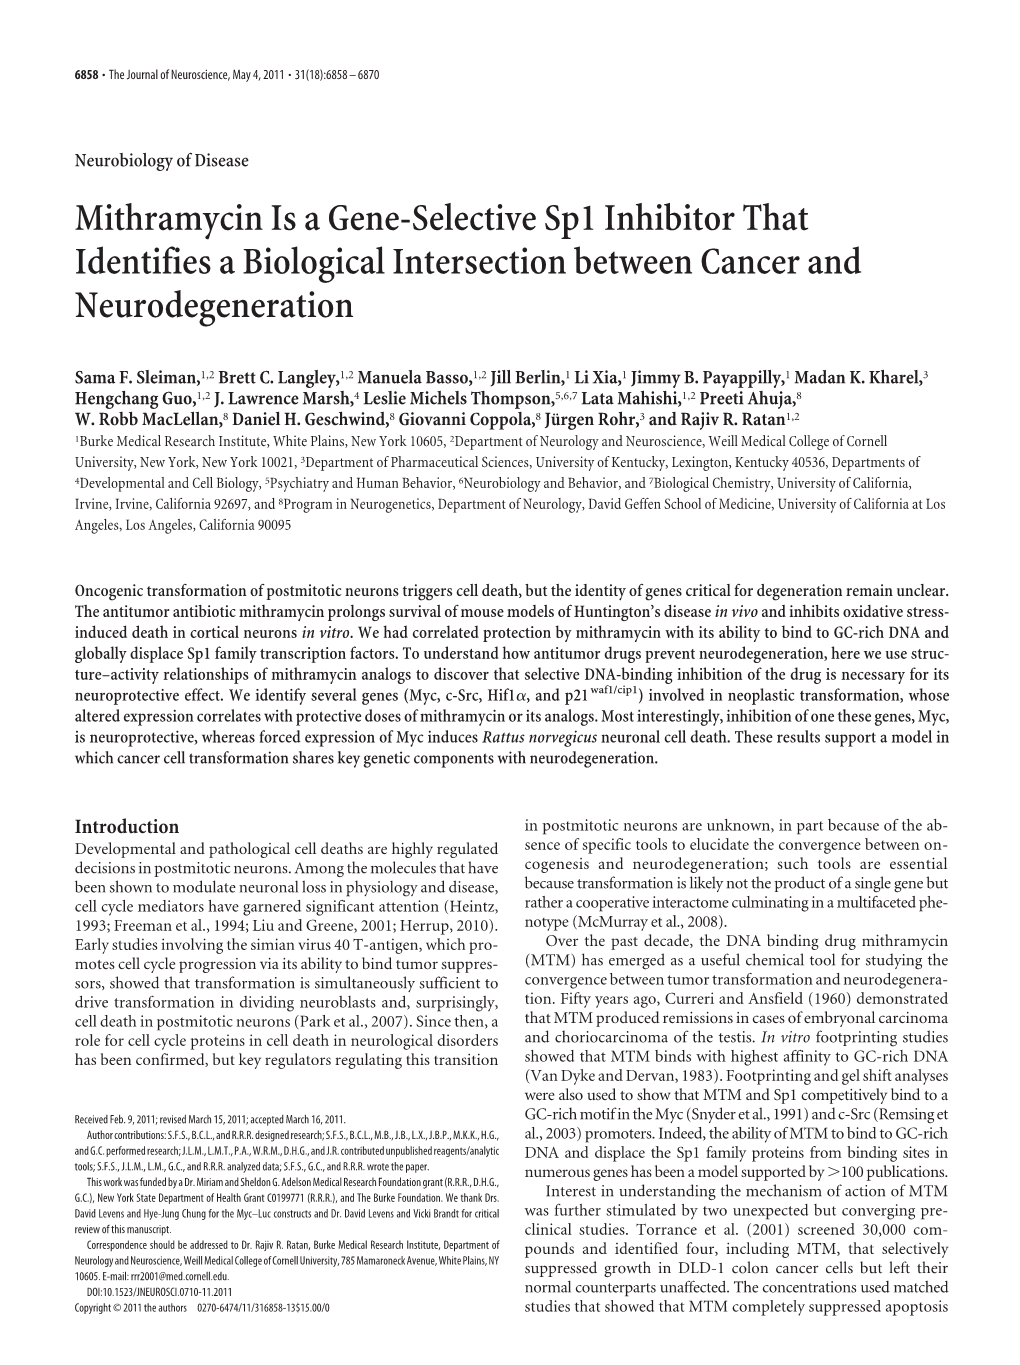 Mithramycin Is a Gene-Selective Sp1 Inhibitor That Identifies a Biological Intersection Between Cancer and Neurodegeneration